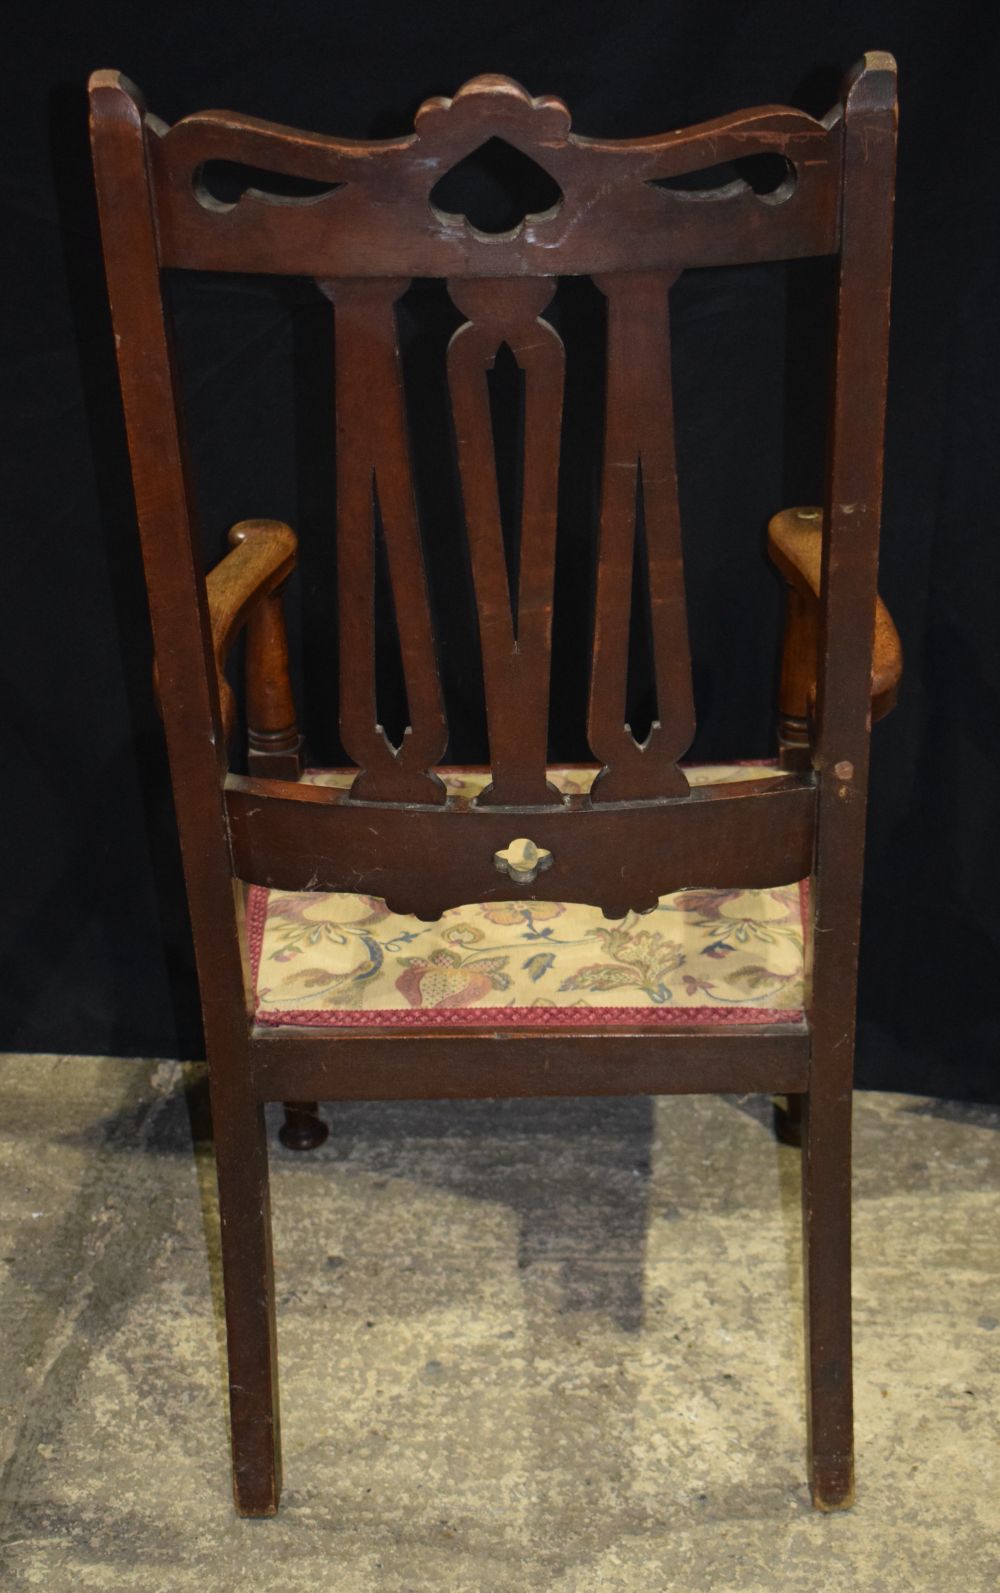 A large 19th Century Oak armchair with covered wooden seat 115 x 58 x 54 cm - Image 8 of 10